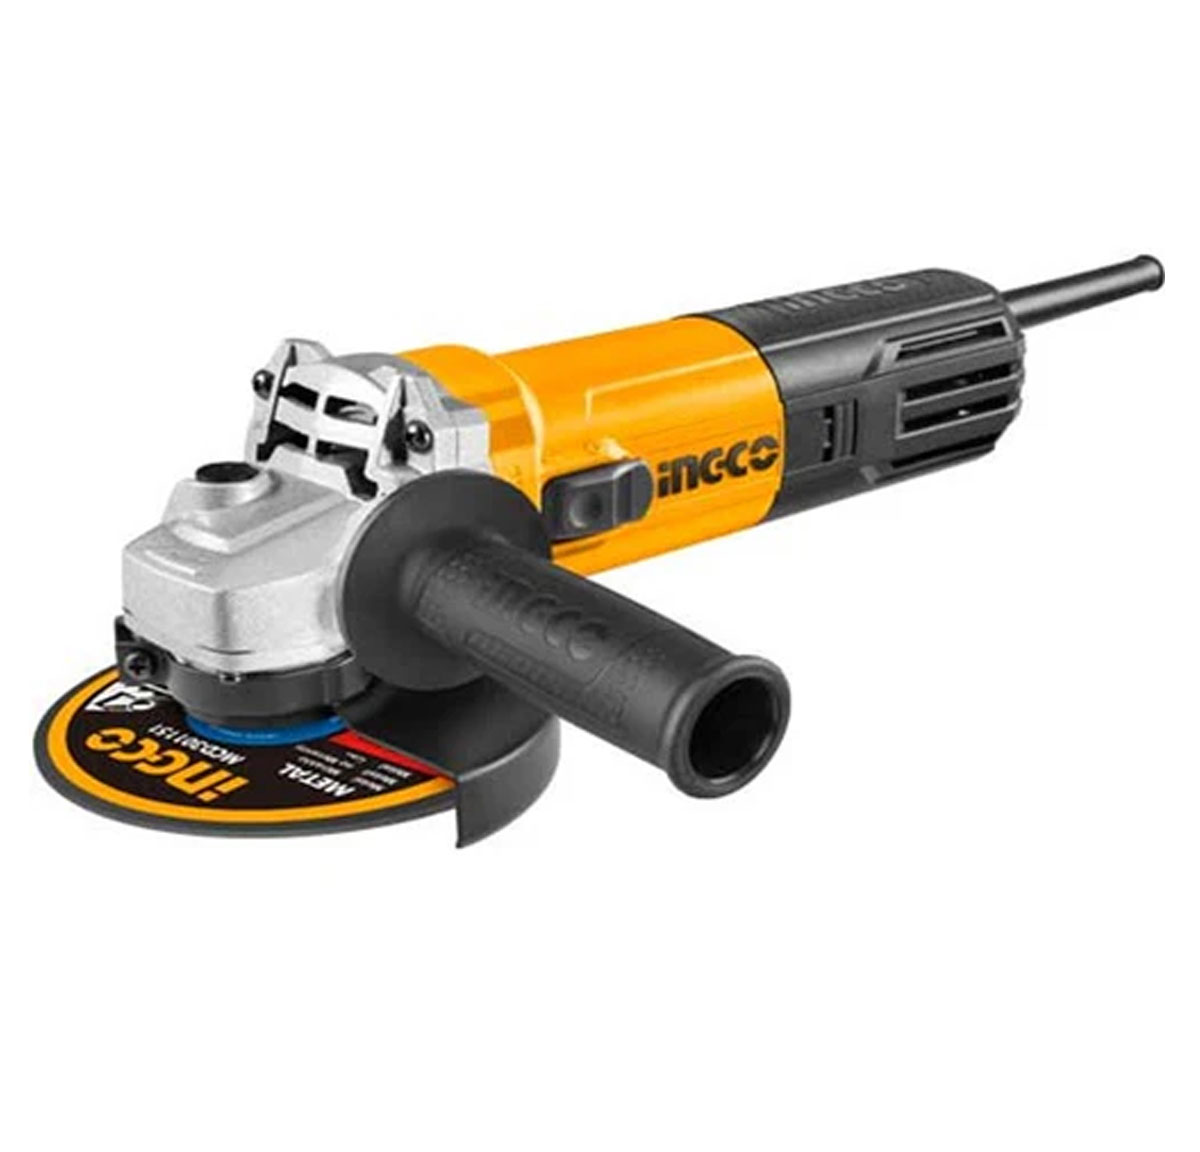 Ingco Angle grinder 950W 115mm AG95018